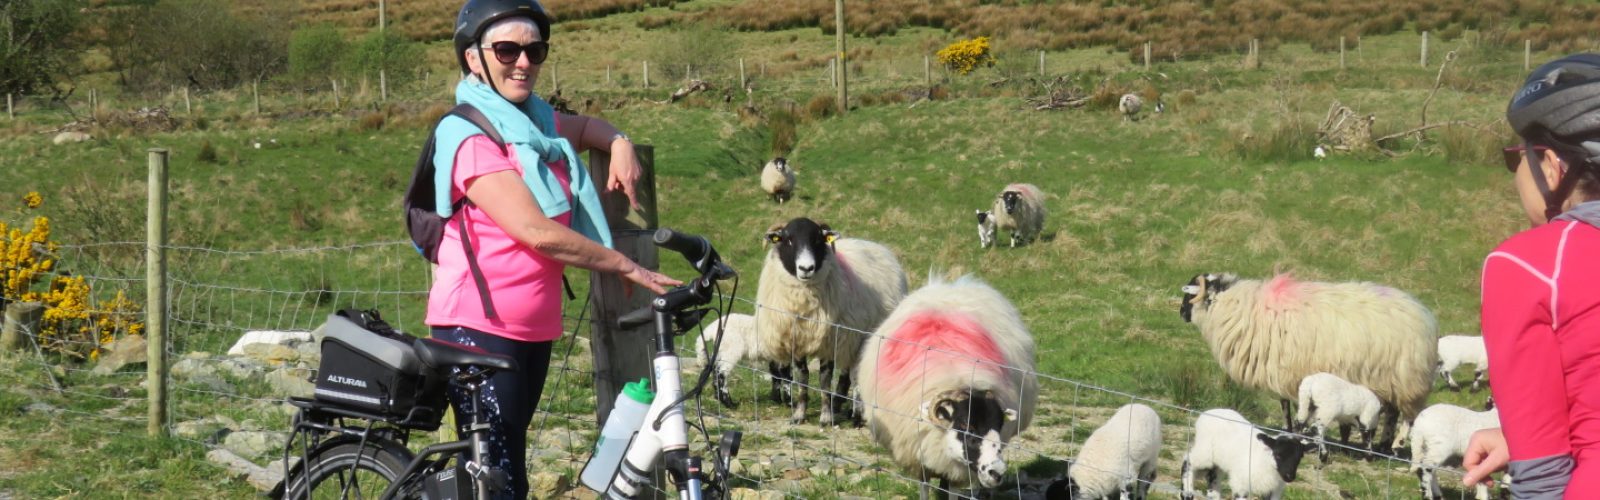 Admiring young lambs on cycle in County Donegal